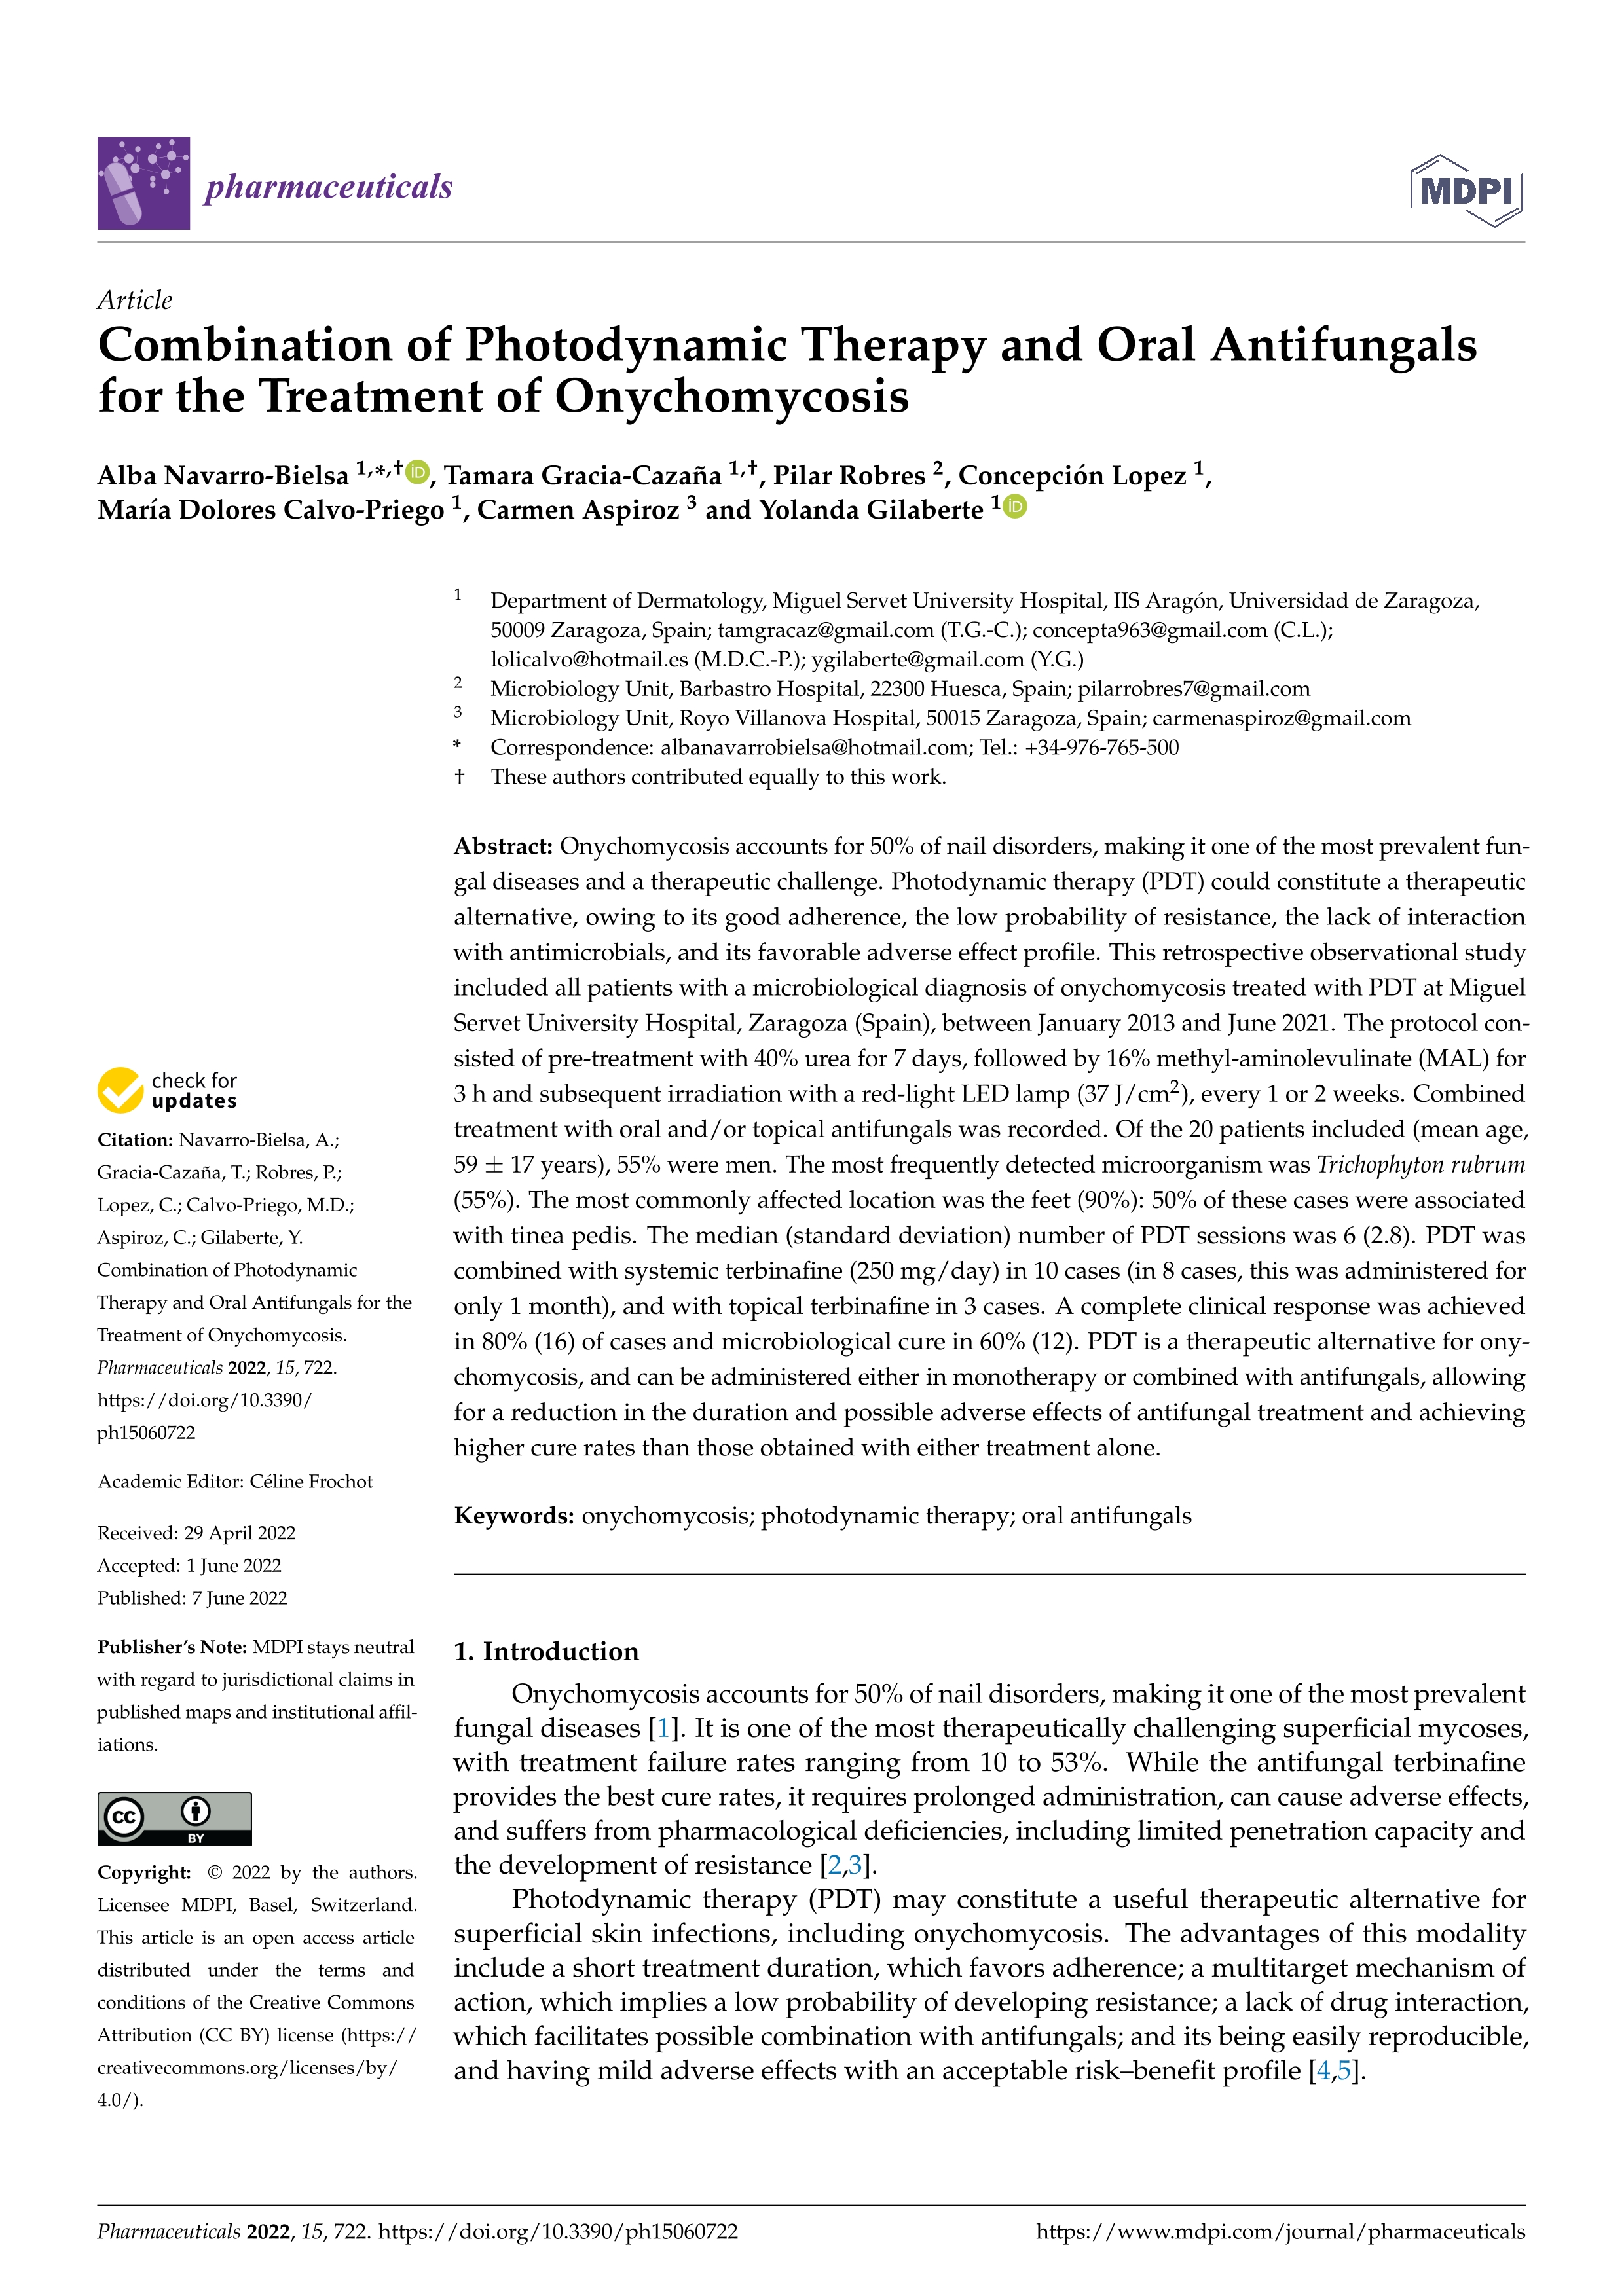 Combination of photodynamic therapy and oral antifungals for the treatment of onychomycosis